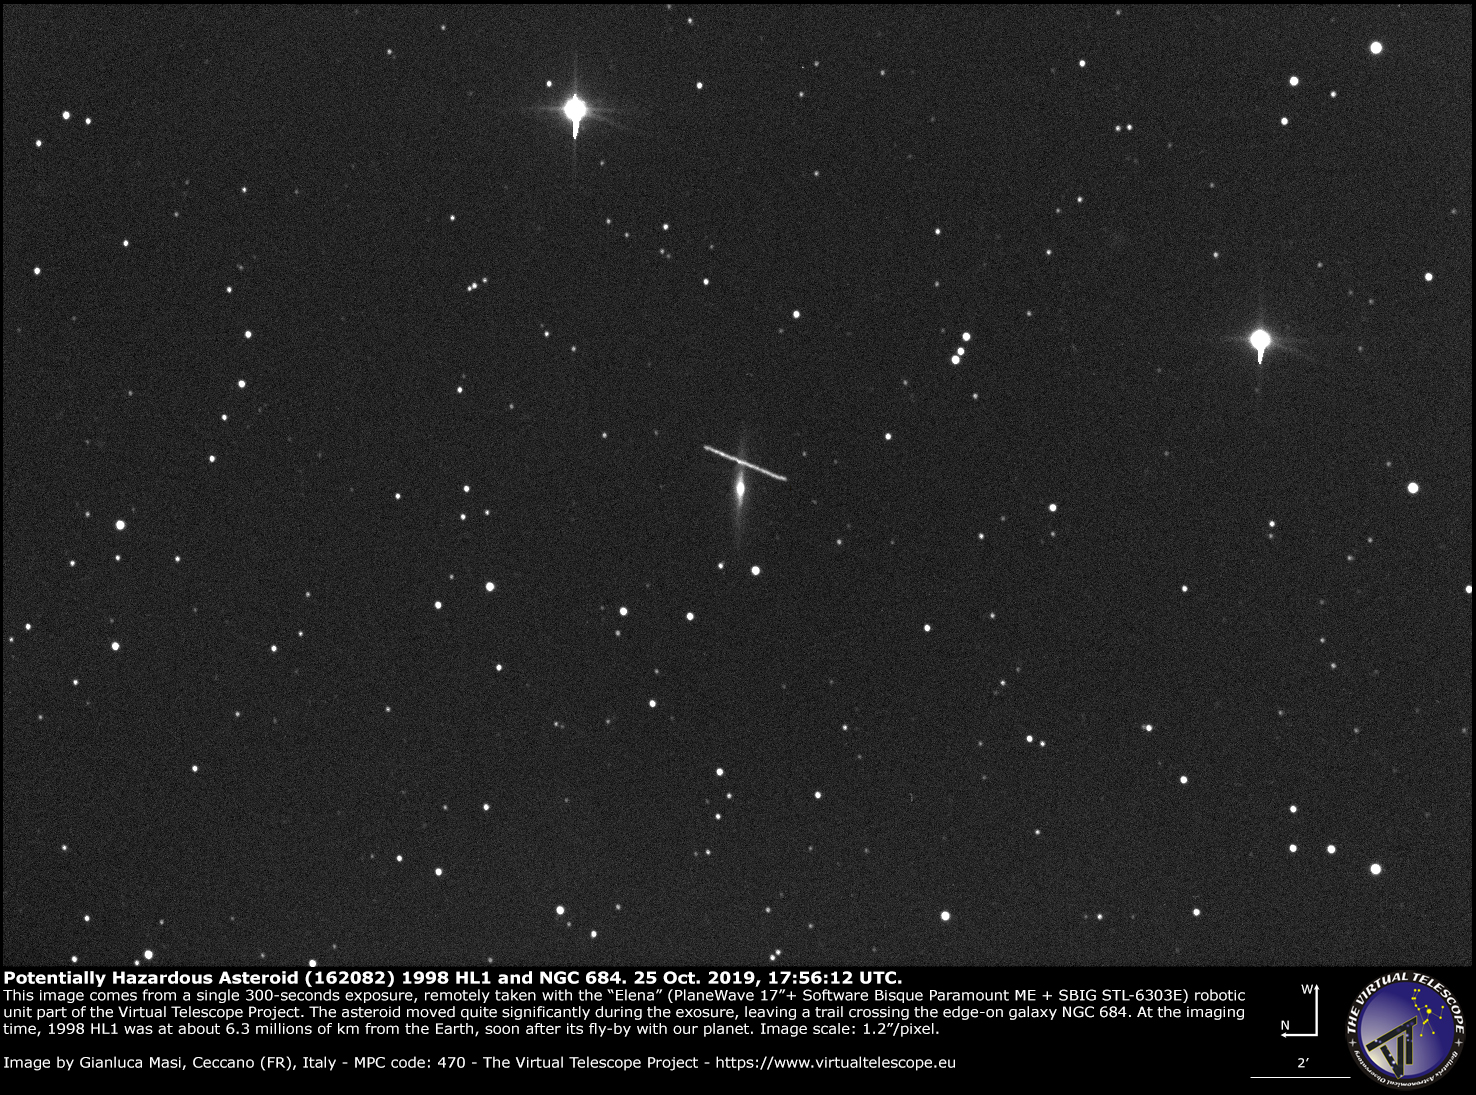 Potentially Hazardous Asteroid (162082) 1998 HL1 and galaxy NGC 684 - 25 Oct. 2019